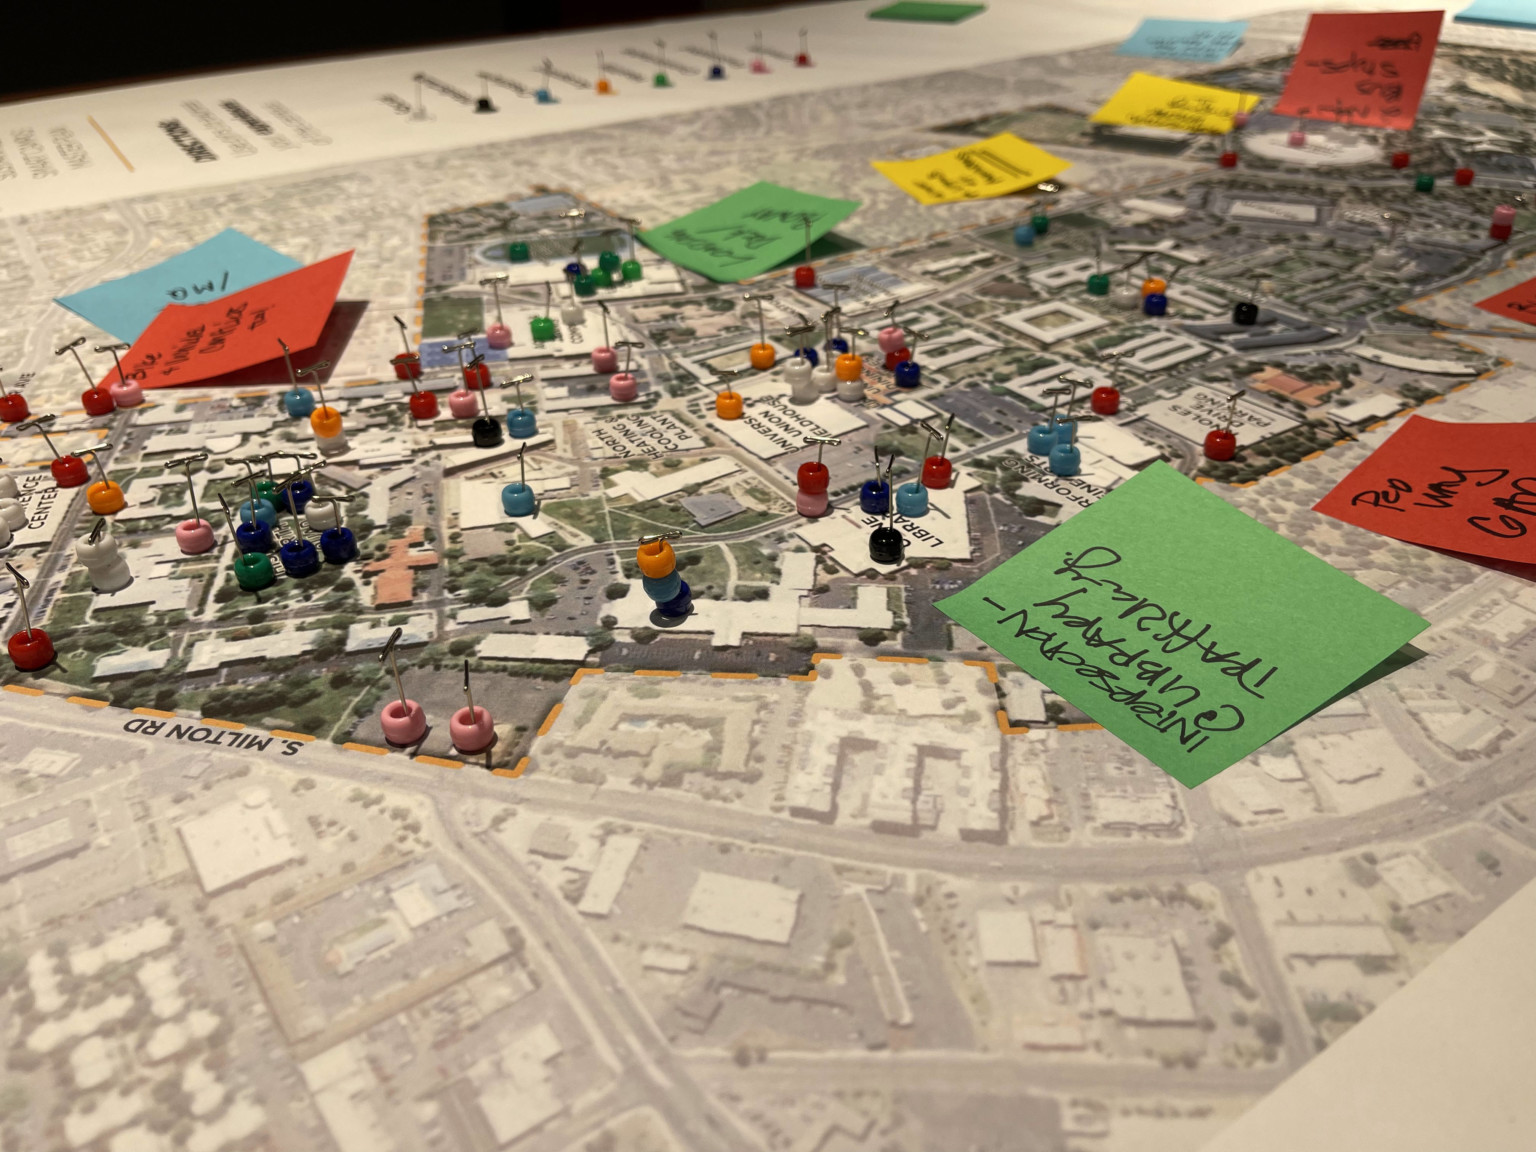 master plan poster with buildings, trees, and streets shown in color. colorful post-its and beads pinned across mark up